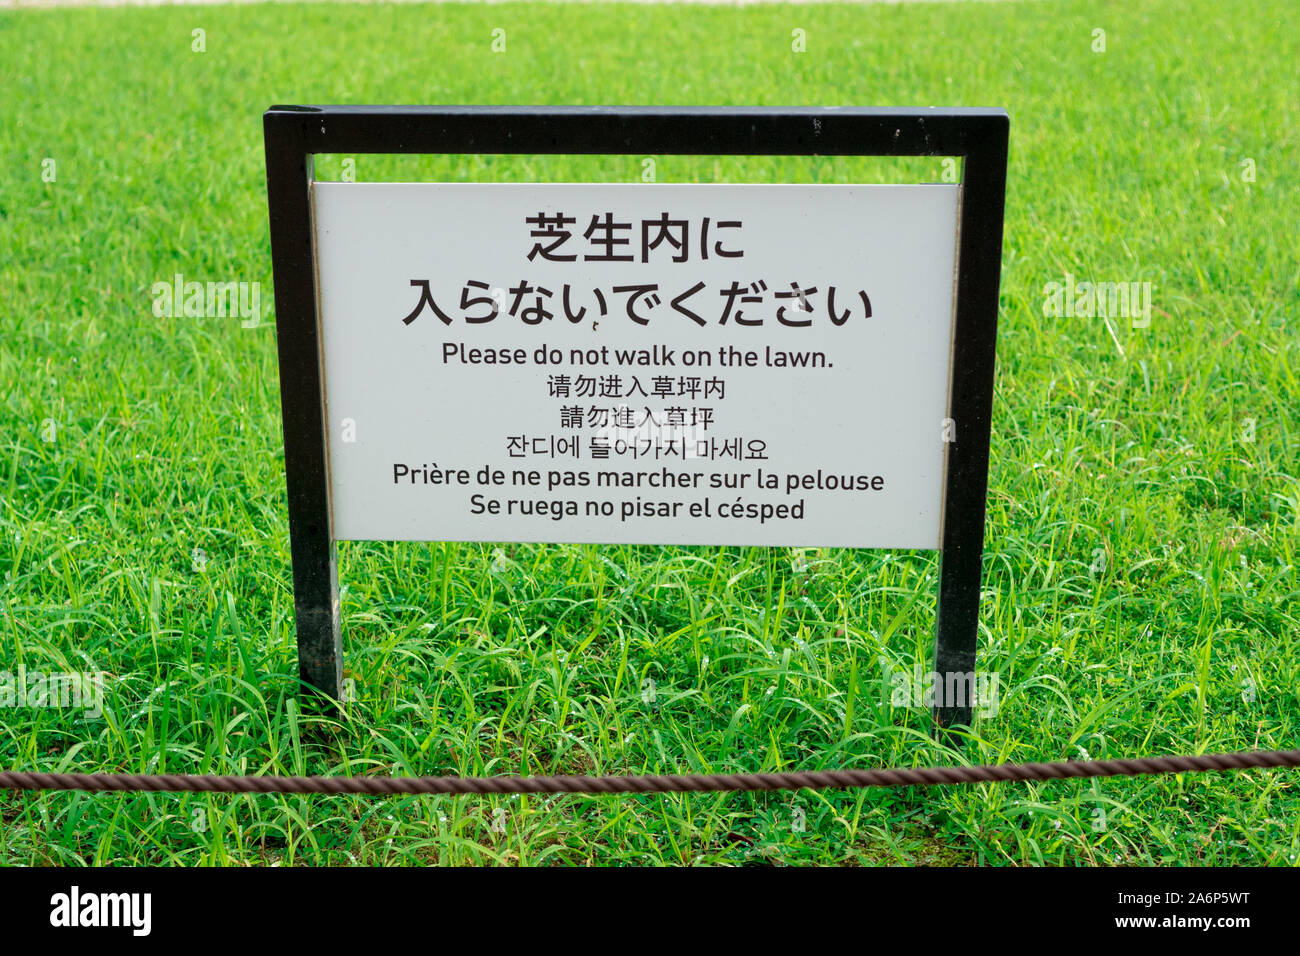 Do not walk in the lawn, Sign in chinese, japanese, english, korean french and spanish. Multi language information sign Kyoto, Japan, 3 august 2019 Stock Photo